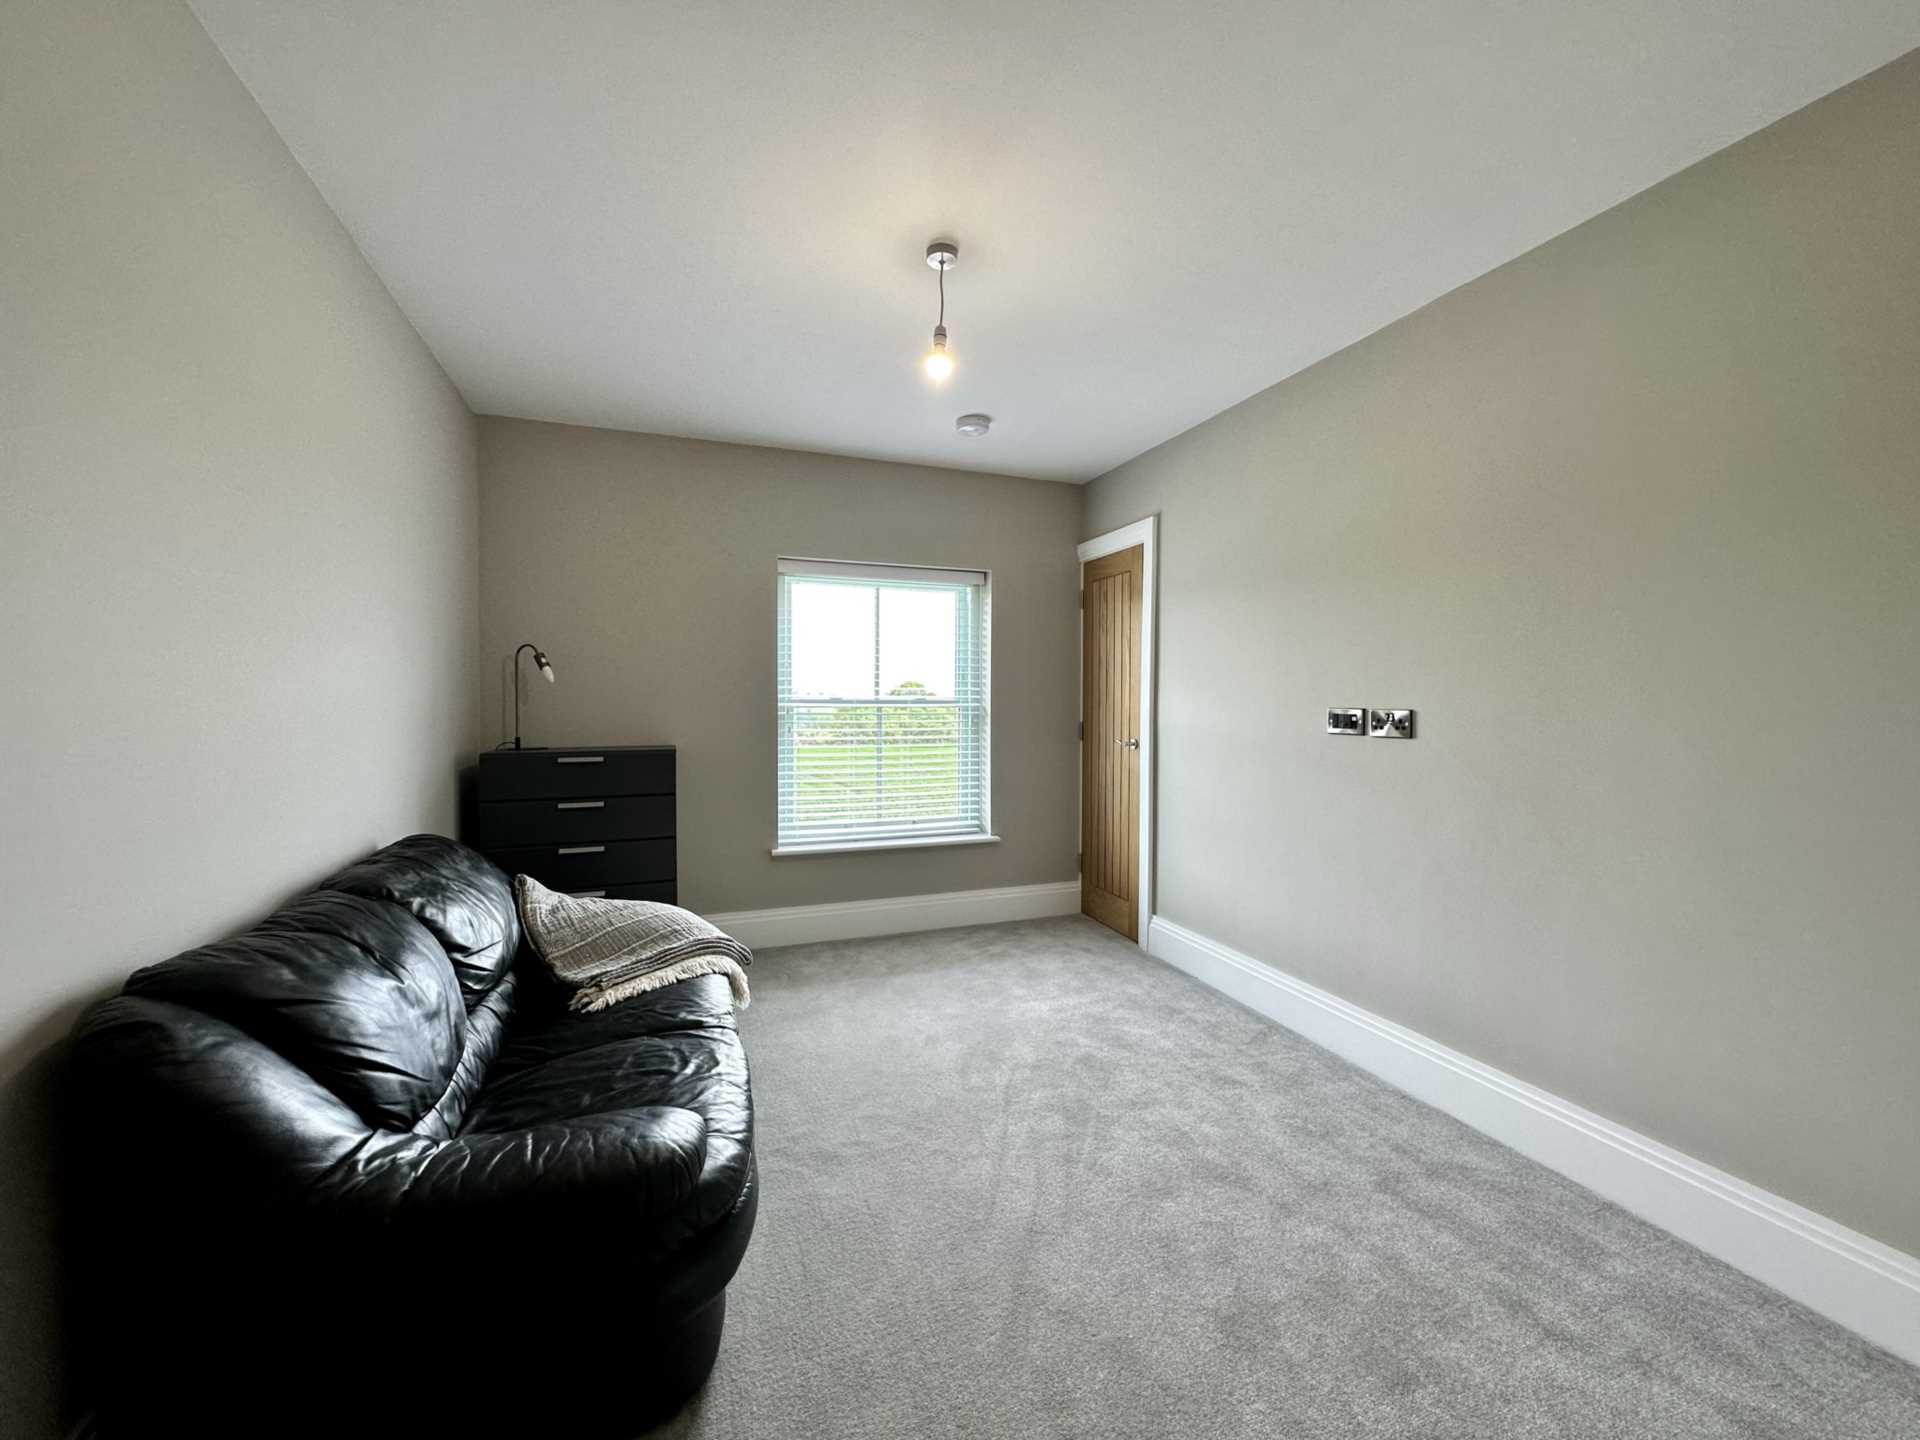 Flat 16 Riverview, 11 Windrush Heights, Near Burford, Image 4